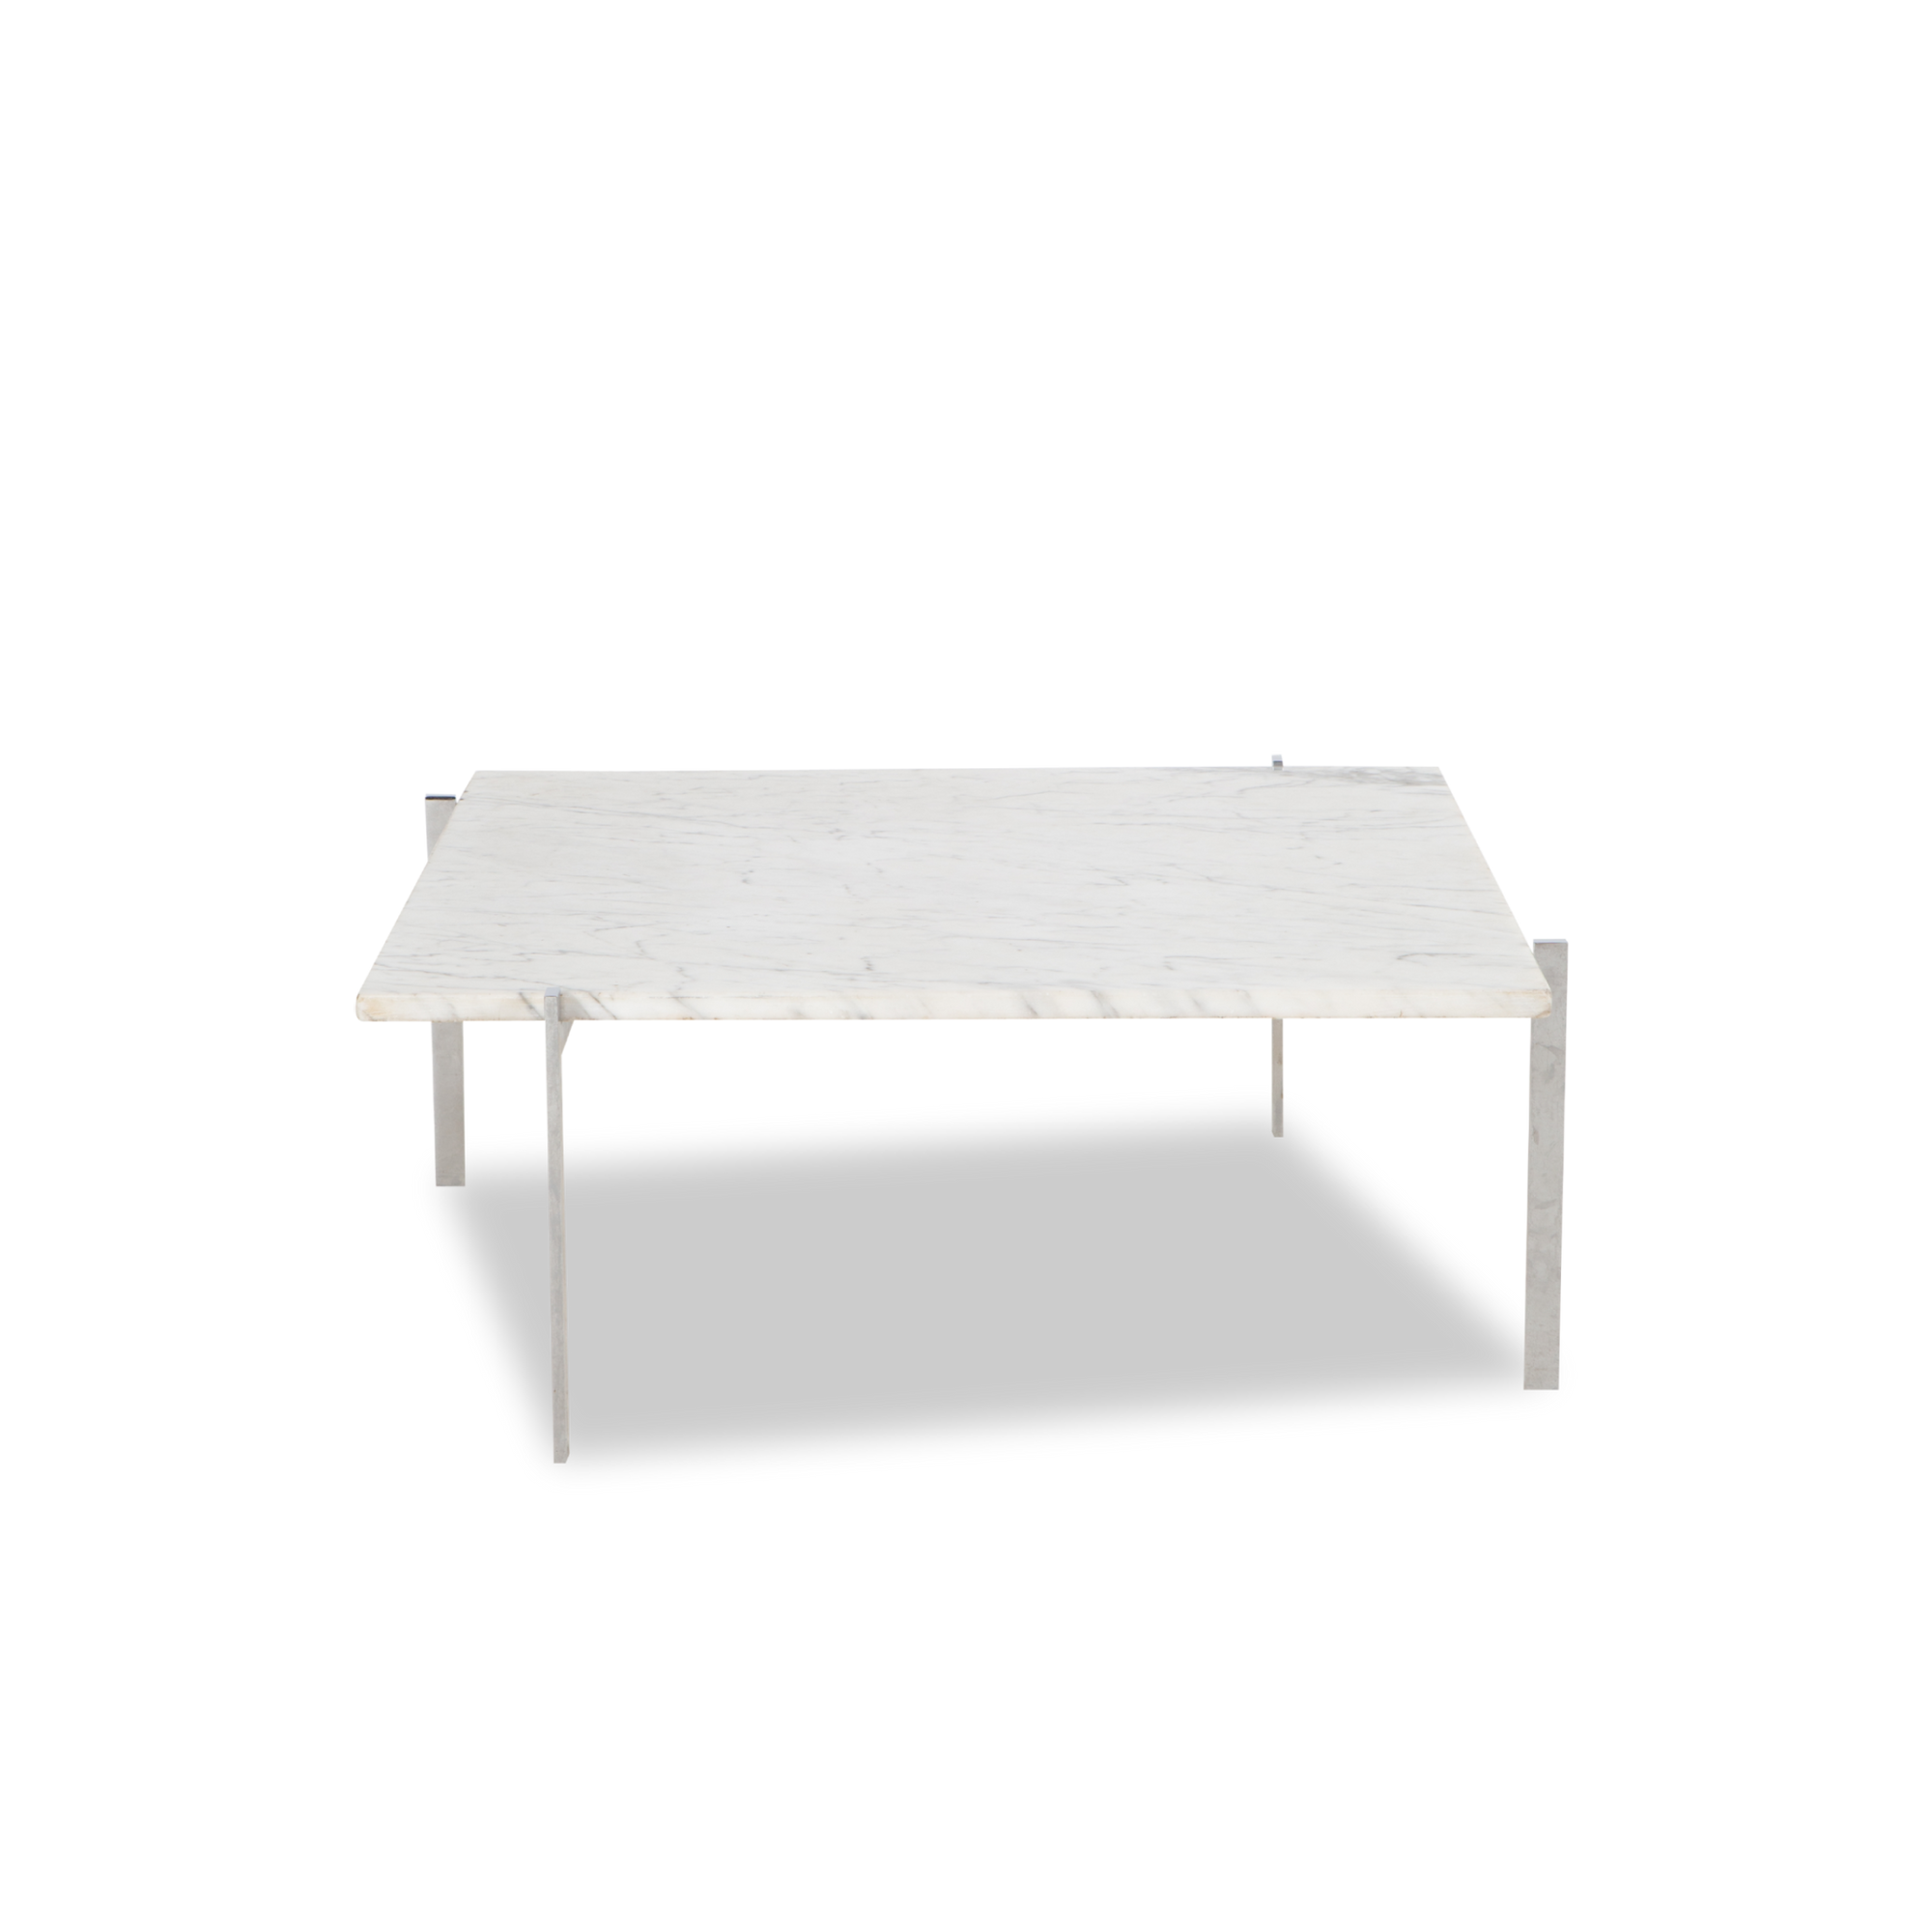 An iconic minimalist piece, this vintage PK61 Coffee Table was designed by Poul Kjaerholm and was manufactured by E.